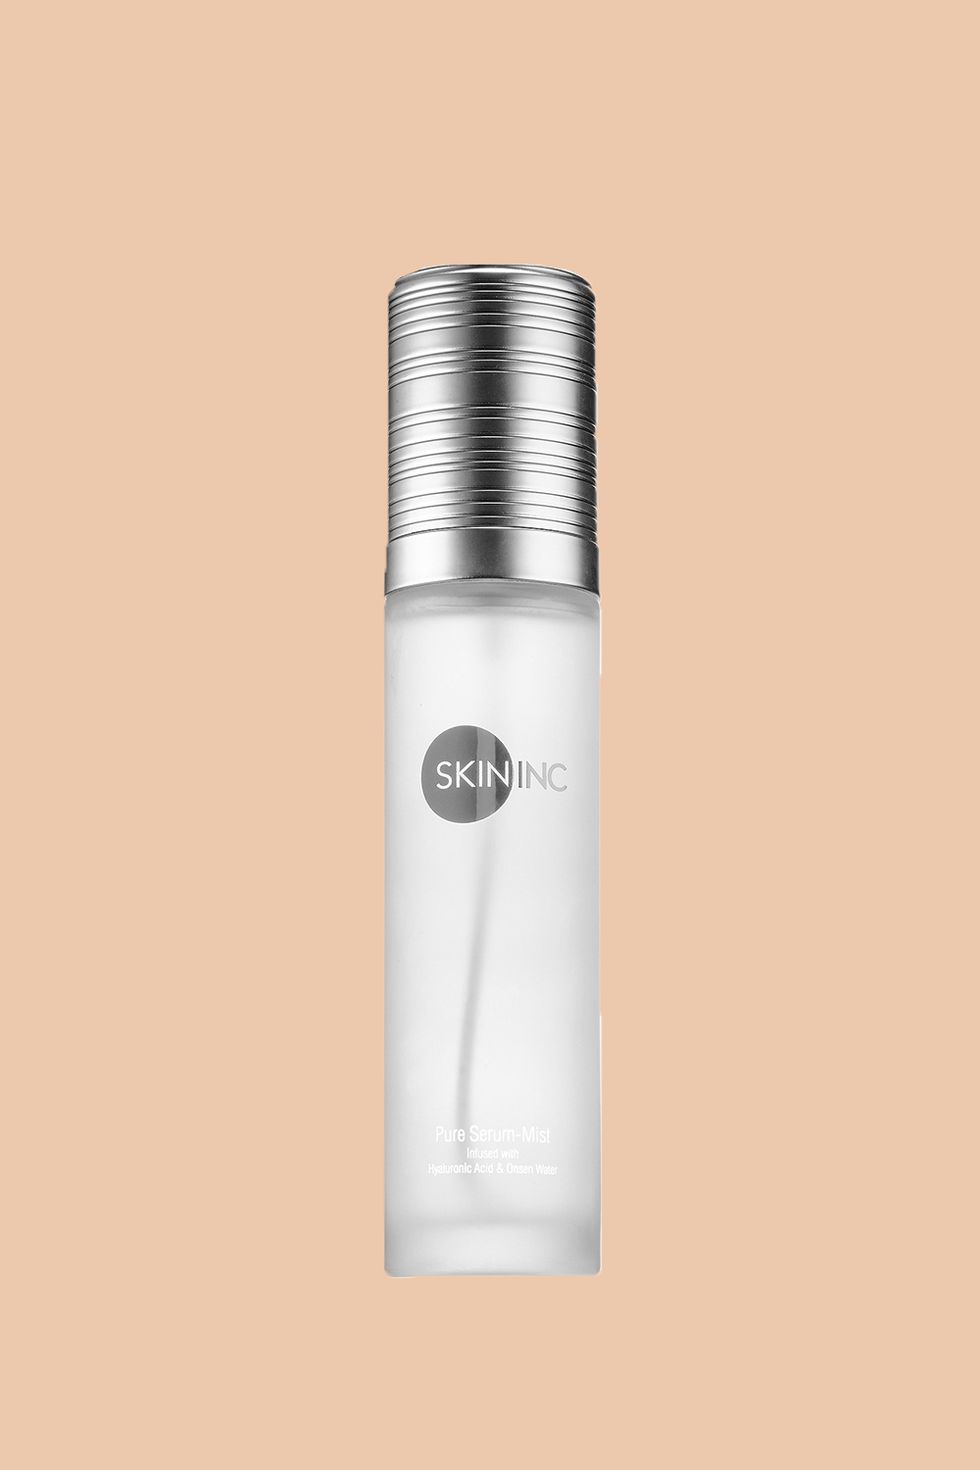 <p>If your&nbsp;skin is in distress or sensitive by nature, this is the sprayable serum for you. Infused with ultra-lightweight hyaluronic acid and mineral-rich, anti-inflammatory Japanese hot spring Onsen water, it&nbsp;moisturizes and restores the skin's natural lipid barrier&nbsp;for the most easily obtained glow of your life.&nbsp;</p><p><br></p><p>Skin Inc. Pure Serum-Mist<span class="redactor-invisible-space" data-verified="redactor" data-redactor-tag="span" data-redactor-class="redactor-invisible-space">, $55;&nbsp;<a href="http://bit.ly/2cSrKaf" target="_blank">sephora.com</a>.</span><br></p>